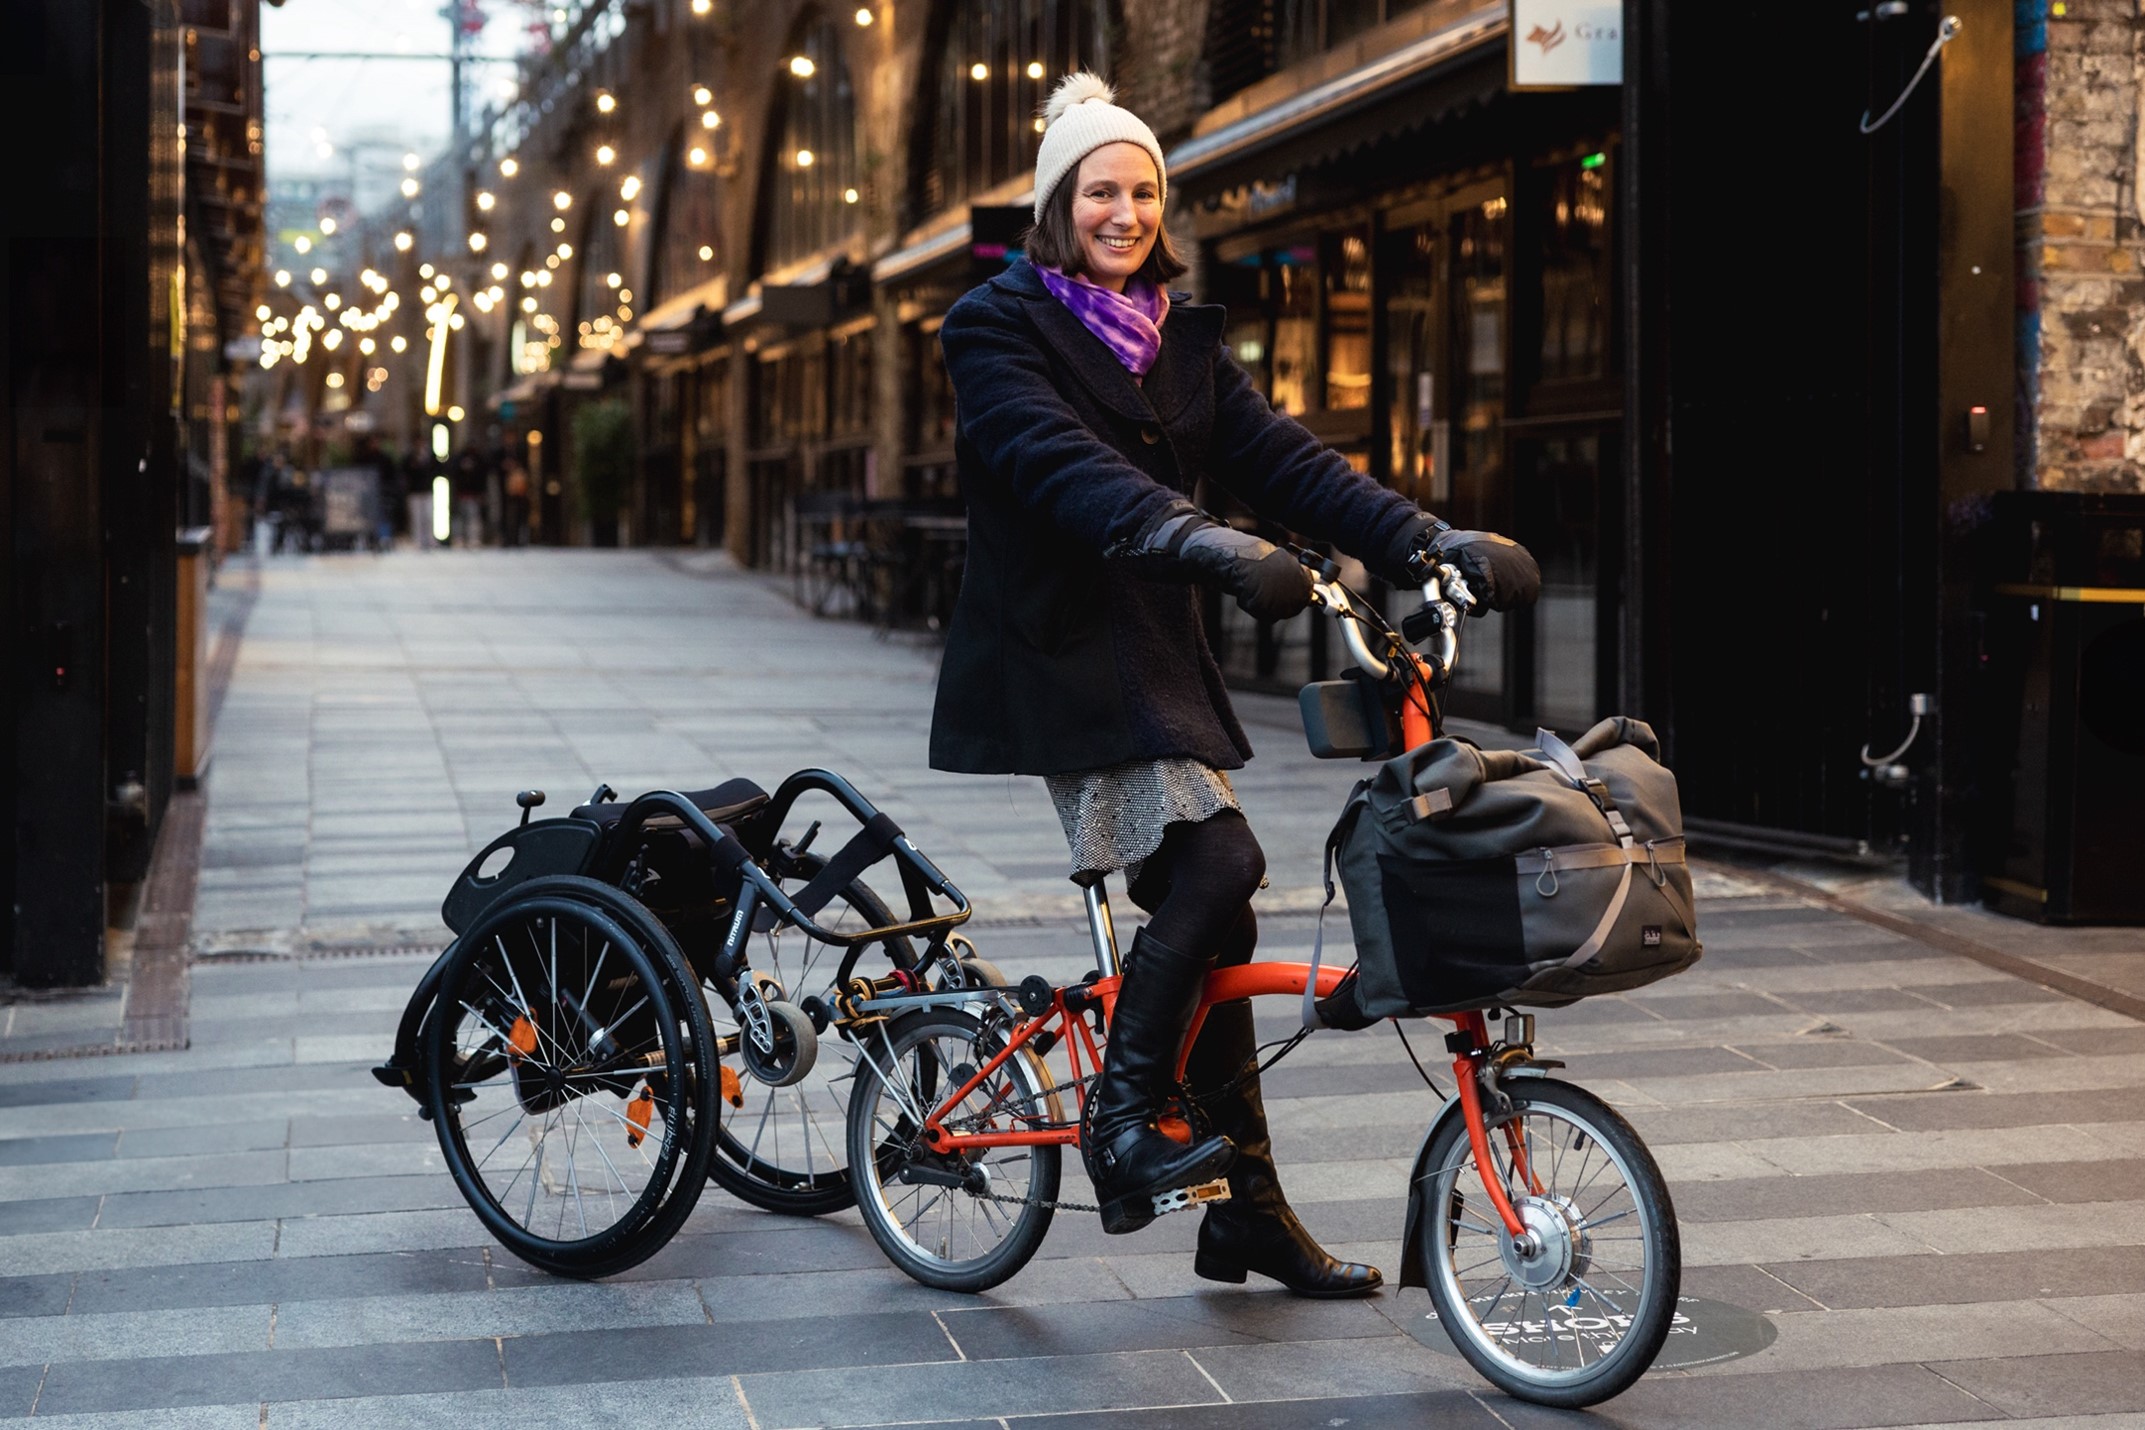 Image: Kate Ball, Campaigns and Policy Officer at Wheels for Wellbeing; credit: Loud Mobility.